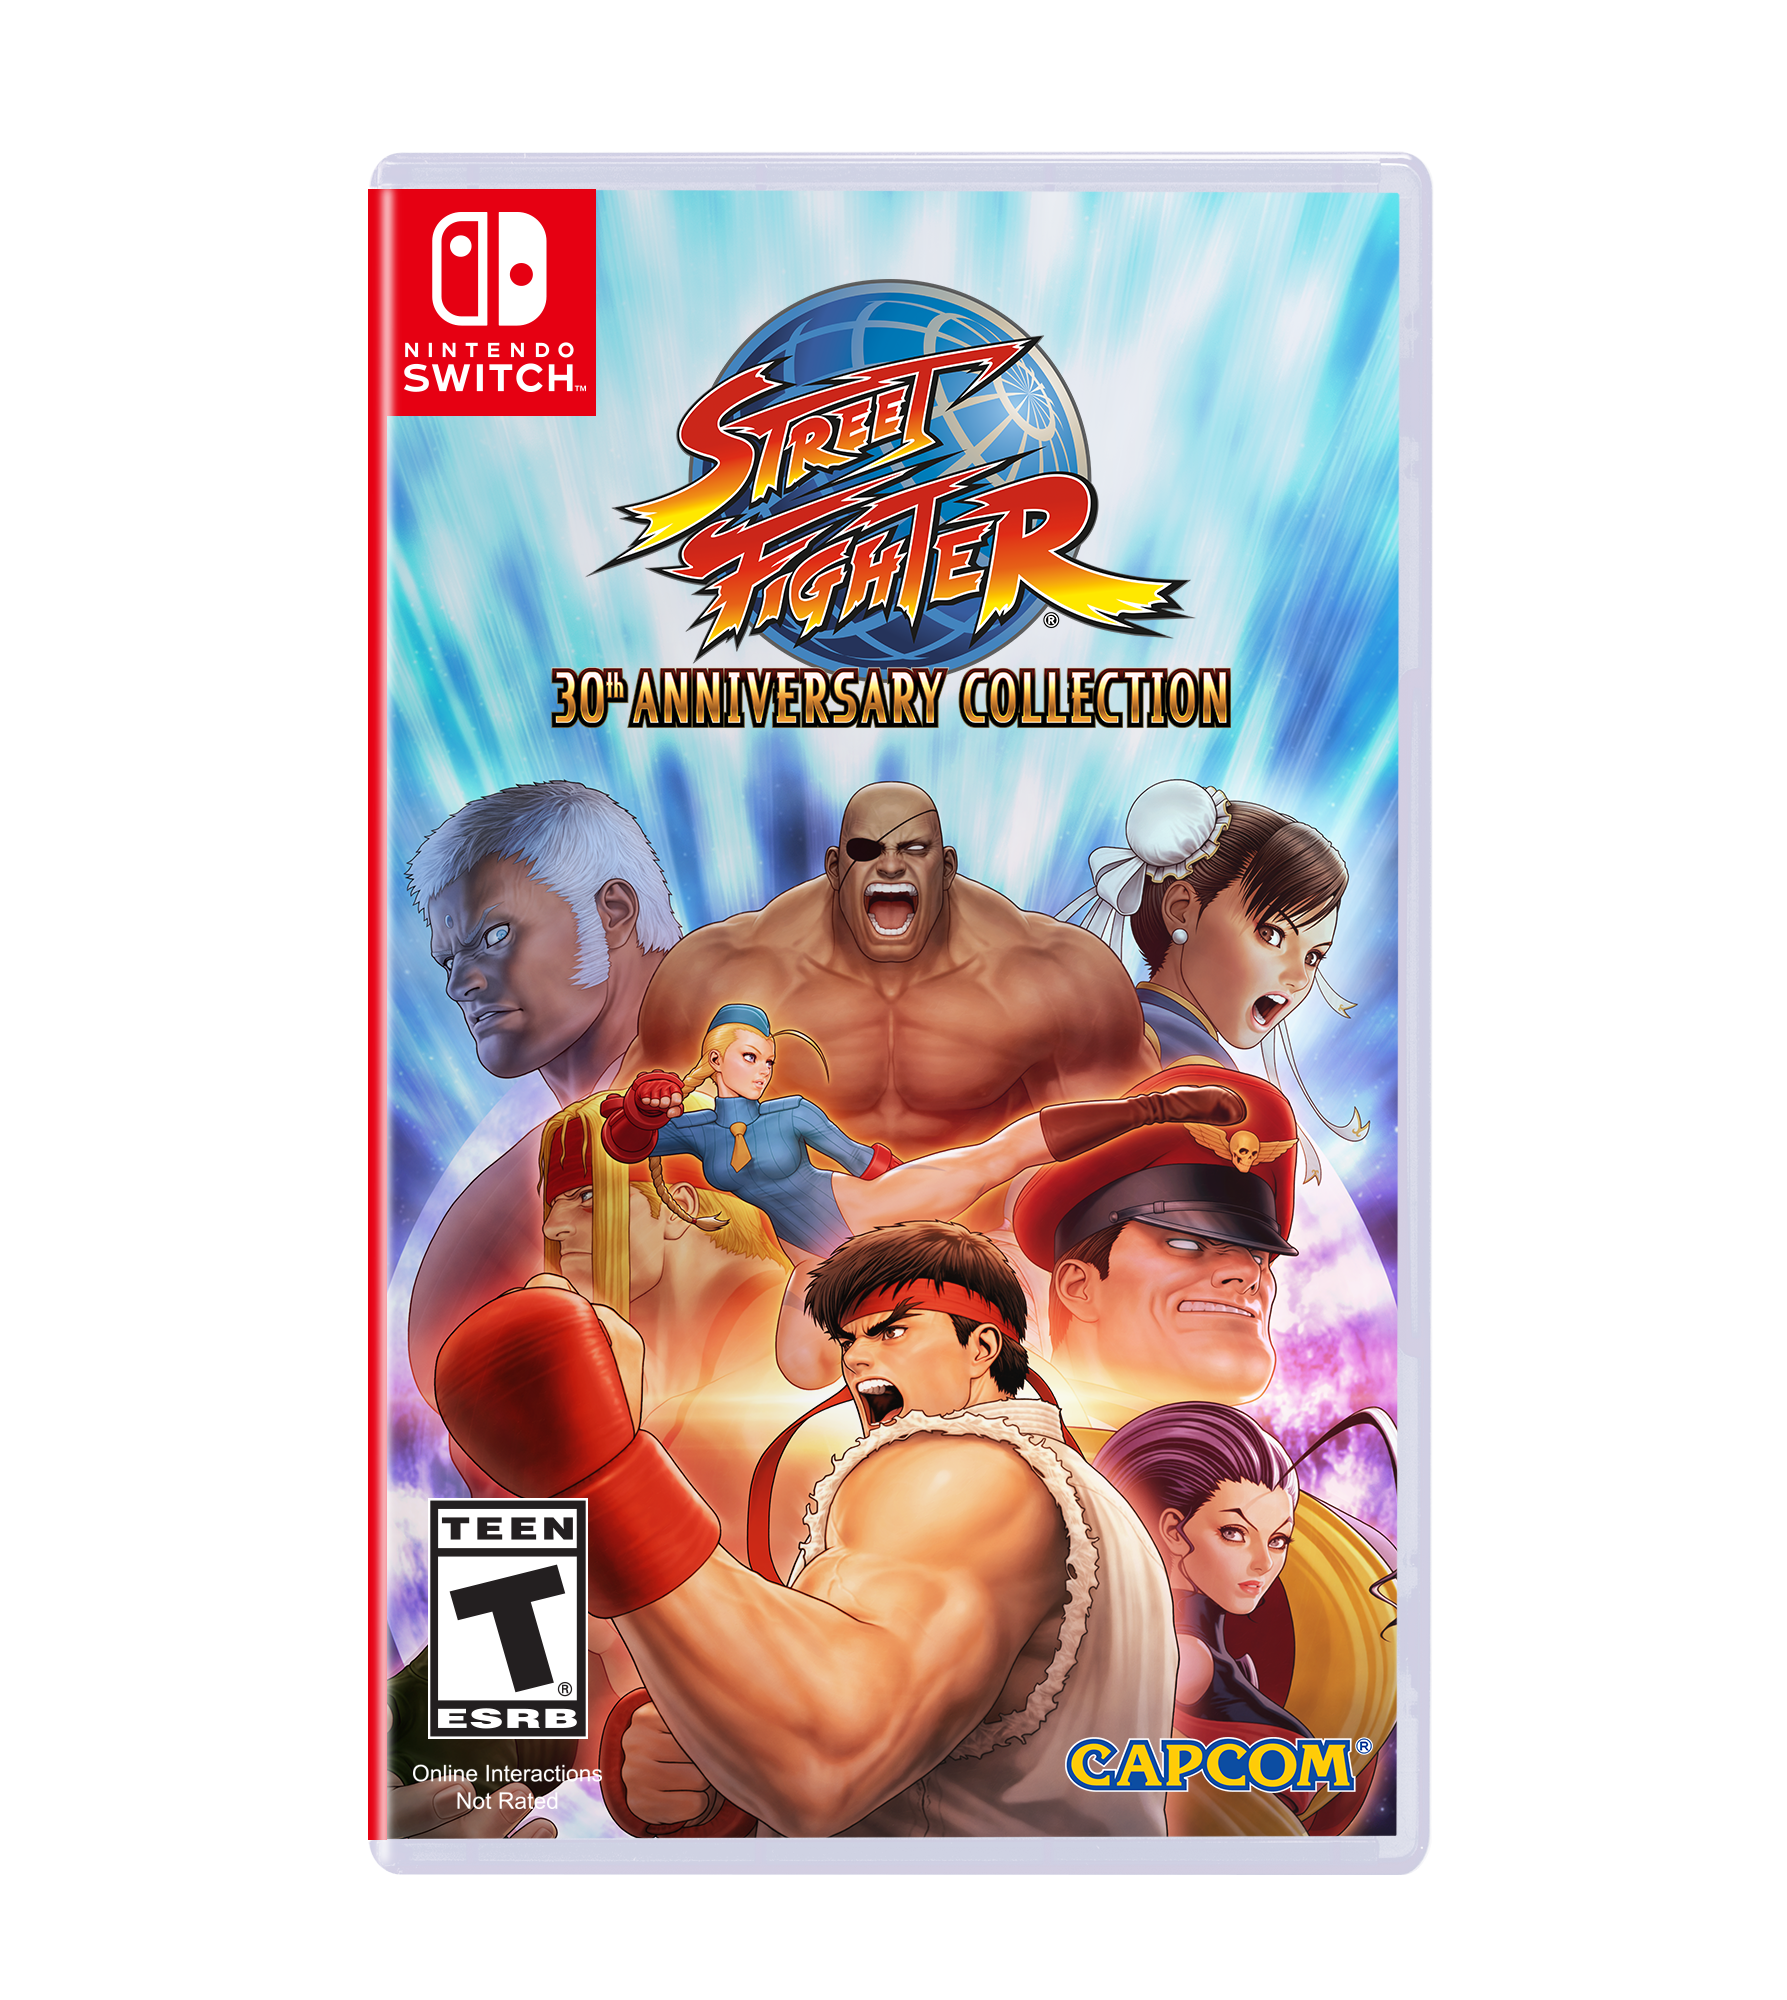 Street Fighter: 30th Anniversary Collection, Capcom, Nintendo Switch, [Physical], 013388410033 - image 1 of 14